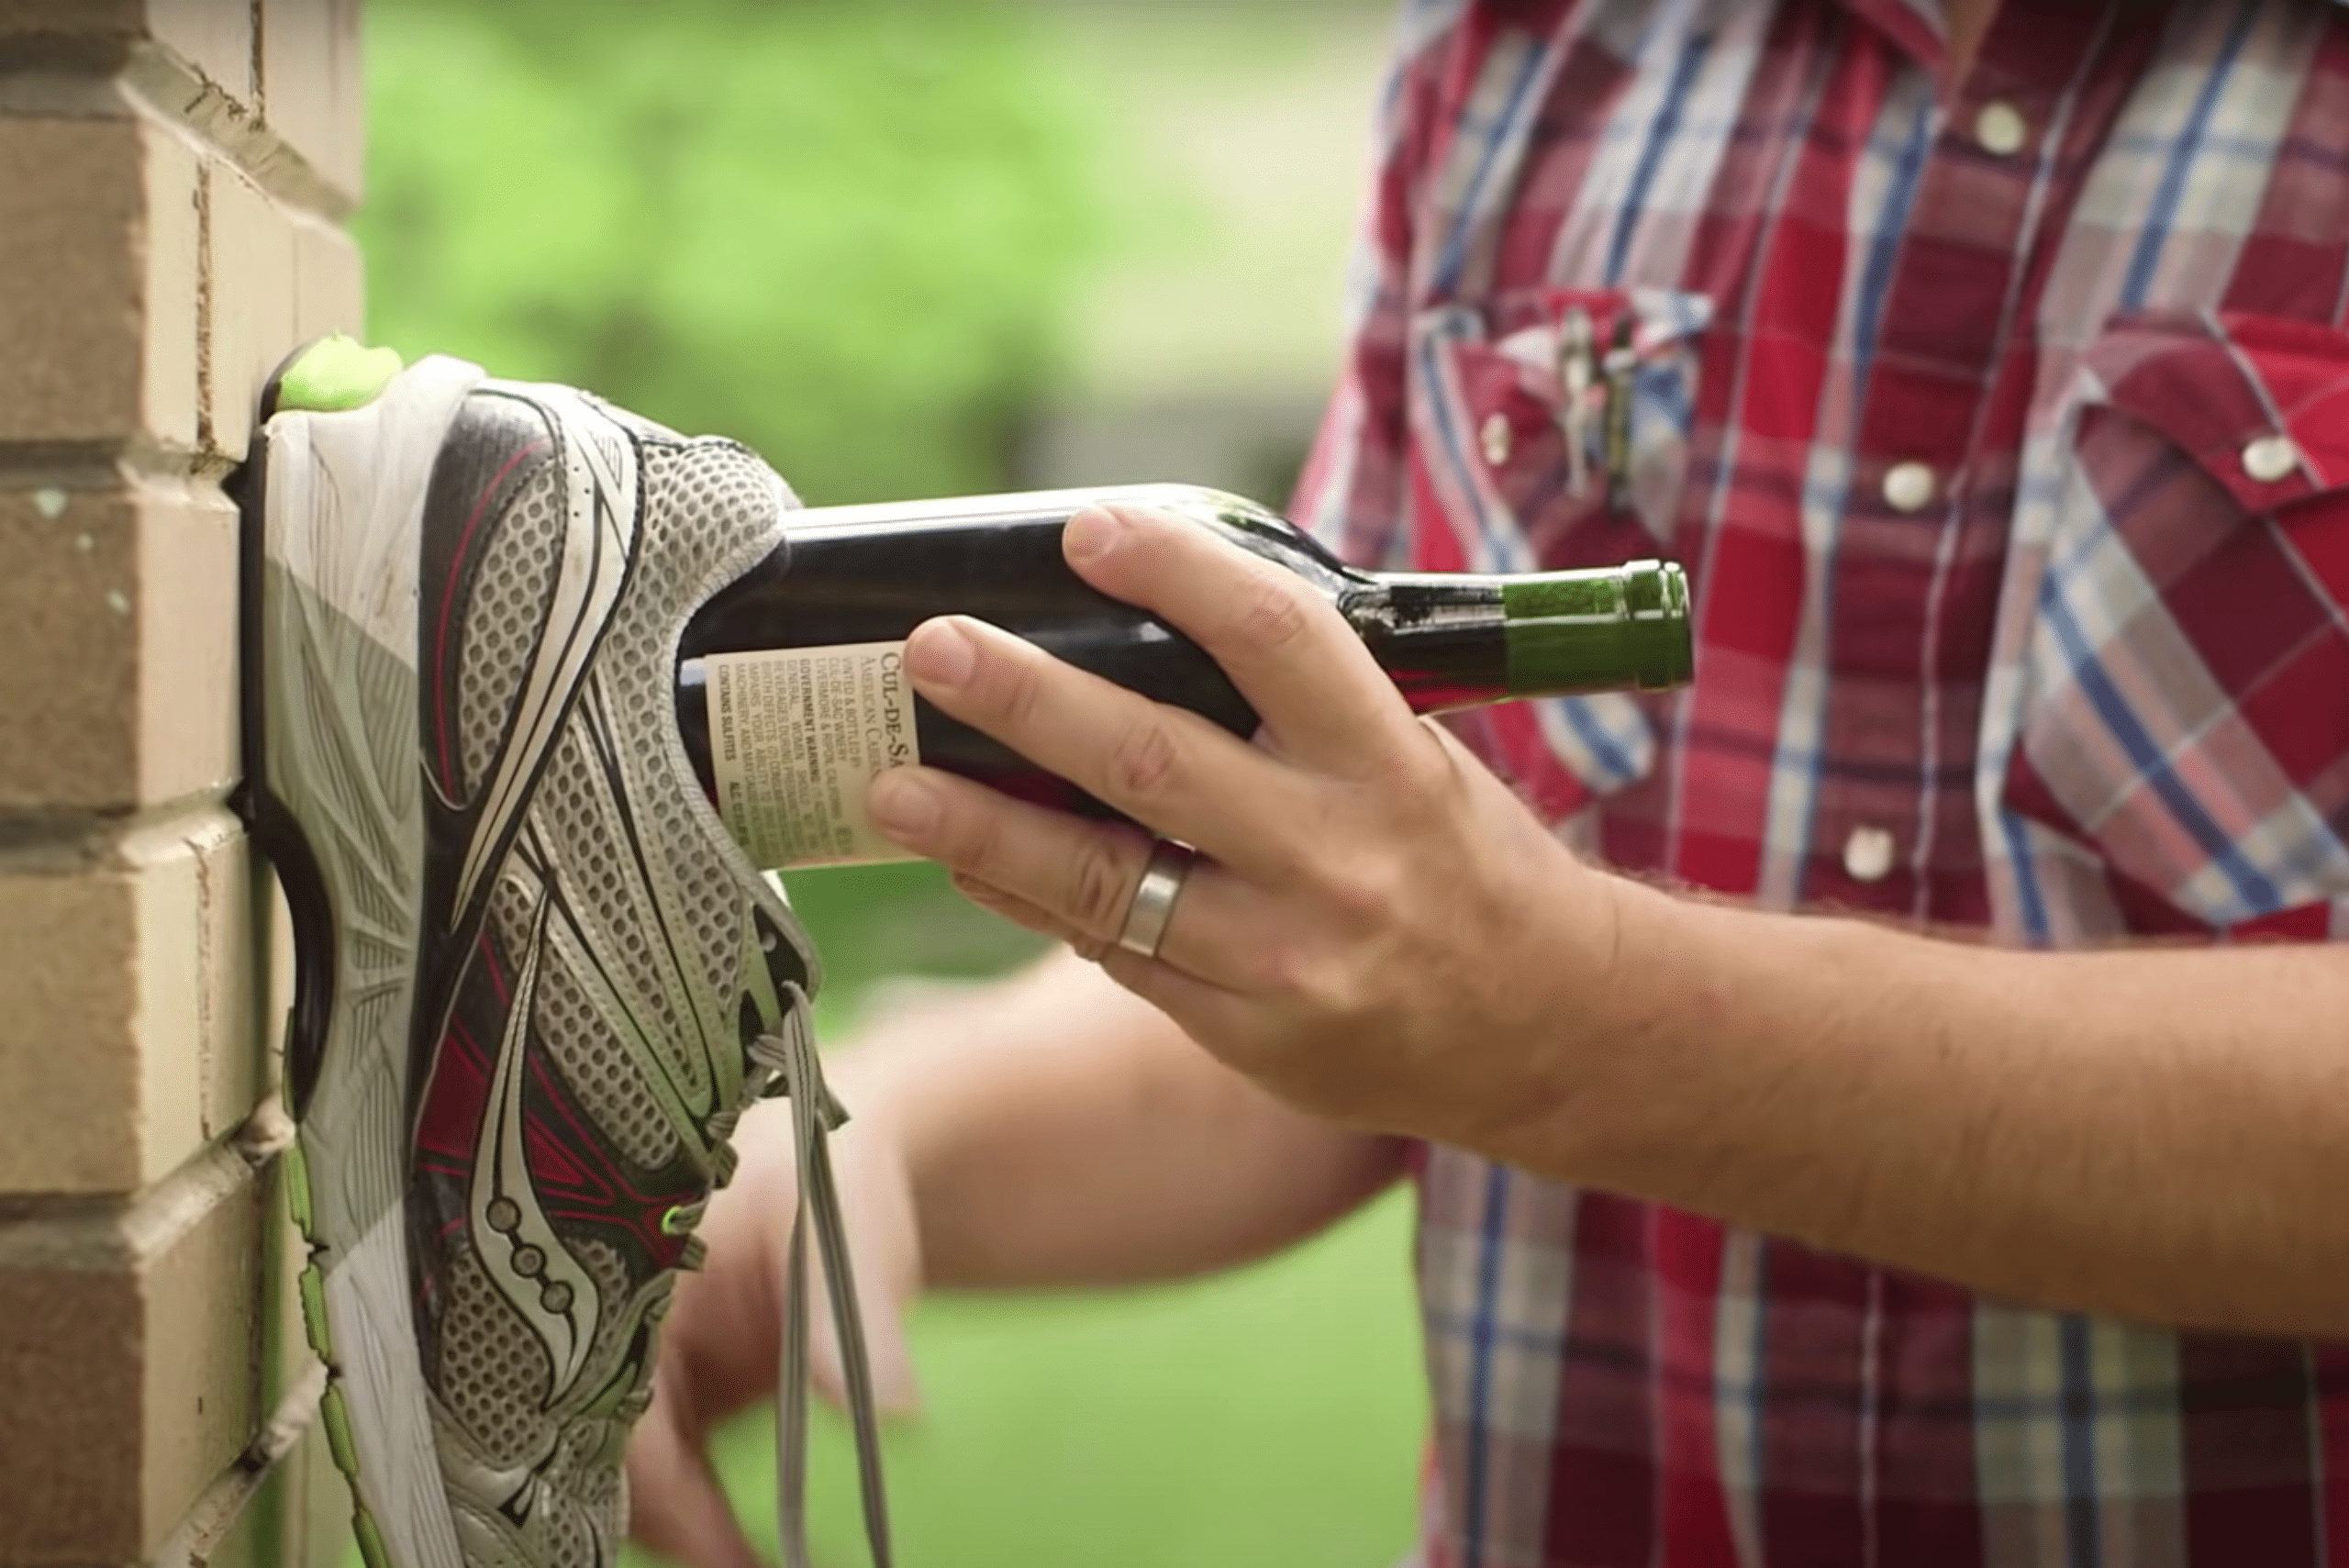 Person using shoe to open wine bottle.